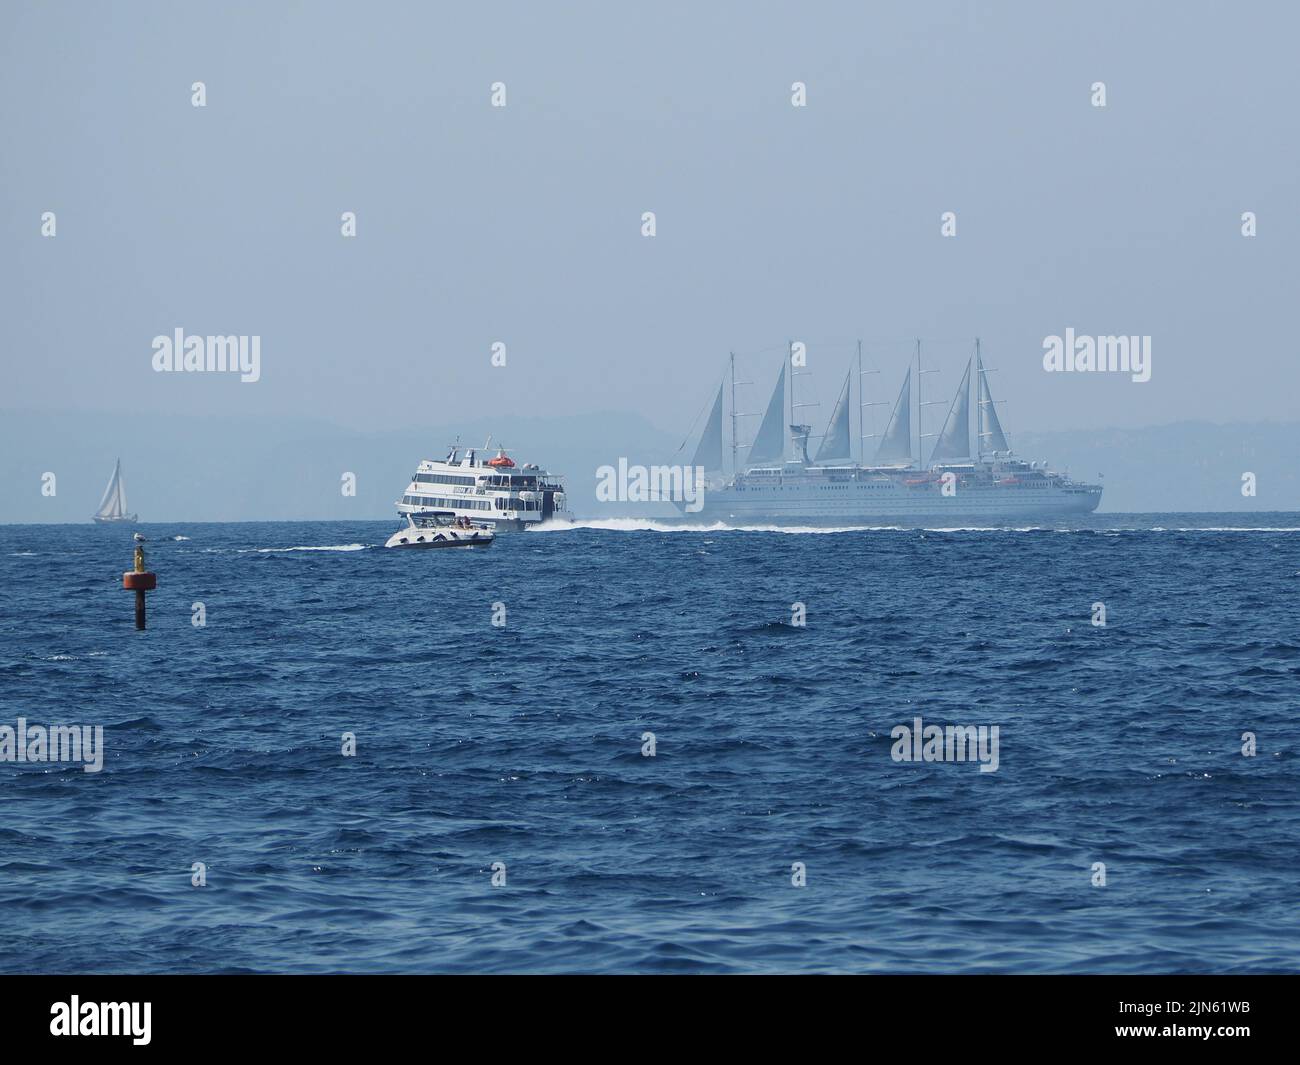 Traffic on the Mediterranean sea near Sorrento including a ferry and a large cruise ship with sails. Stock Photo